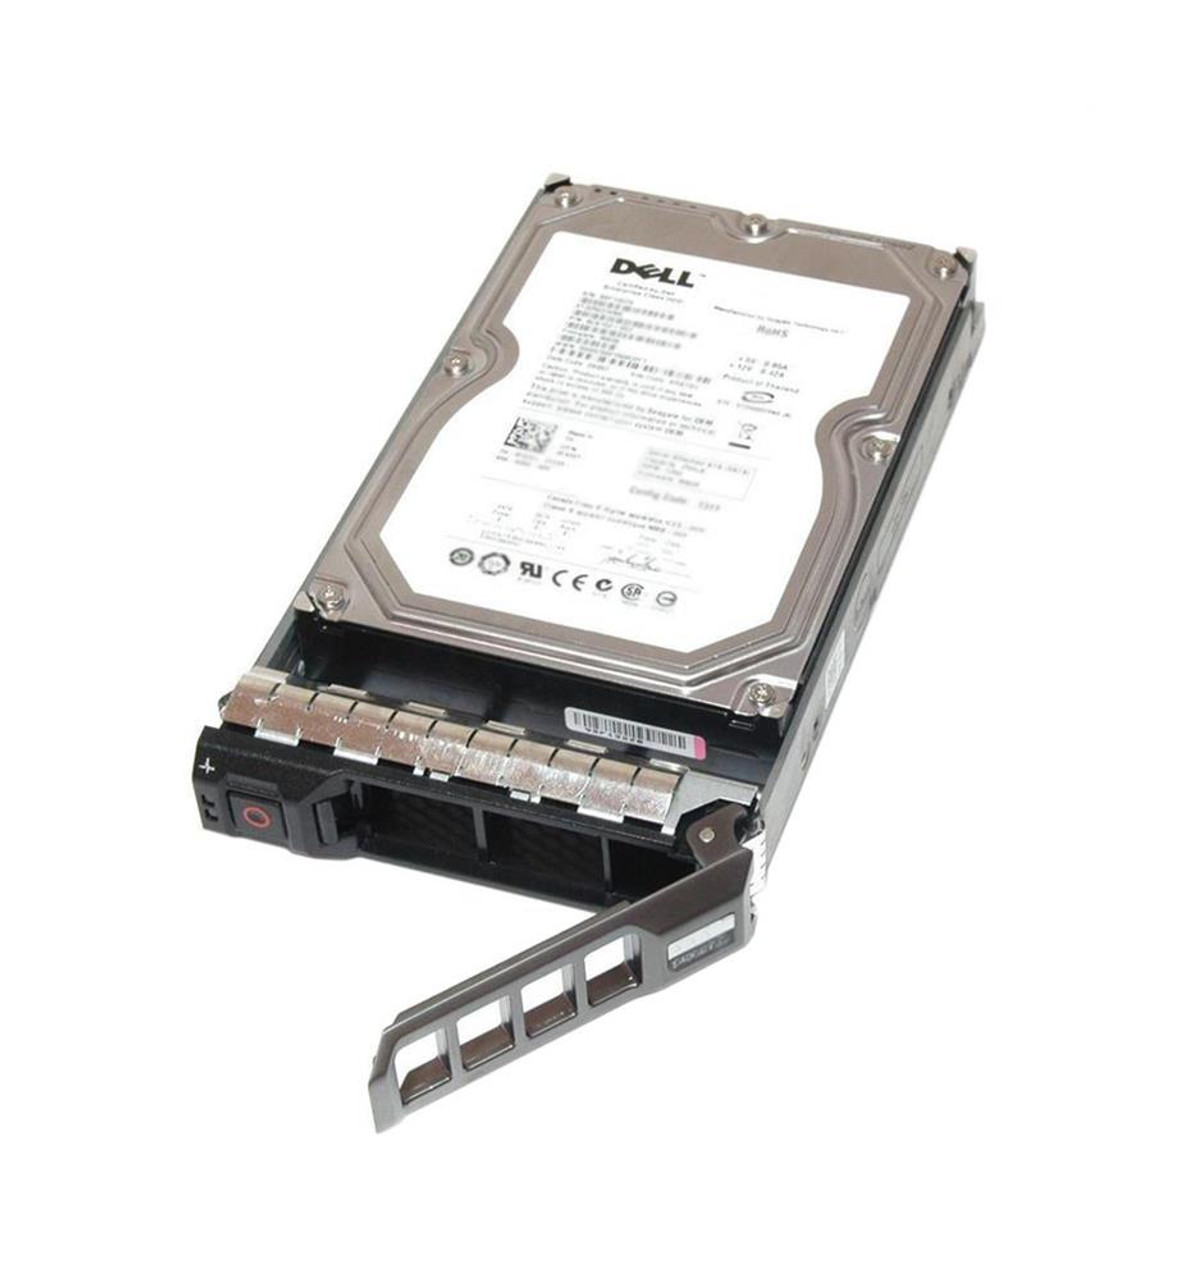 0F15M2 Dell 10TB 7200RPM SAS 12Gbps Hot Swap (4Kn) 3.5-inch Internal Hard Drive with Tray